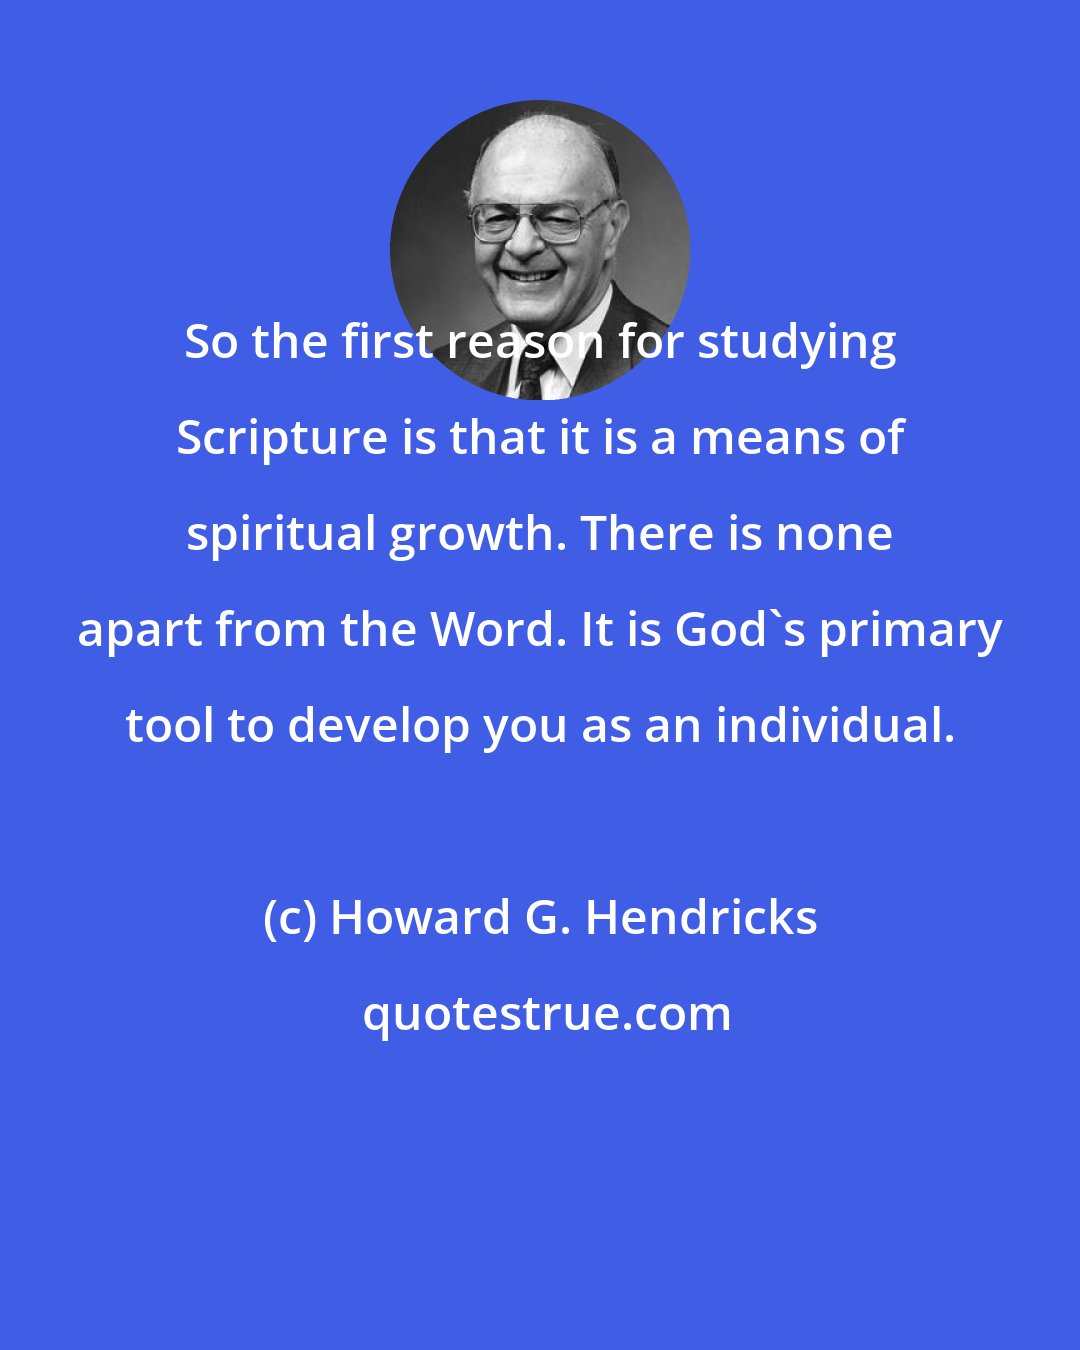 Howard G. Hendricks: So the first reason for studying Scripture is that it is a means of spiritual growth. There is none apart from the Word. It is God's primary tool to develop you as an individual.